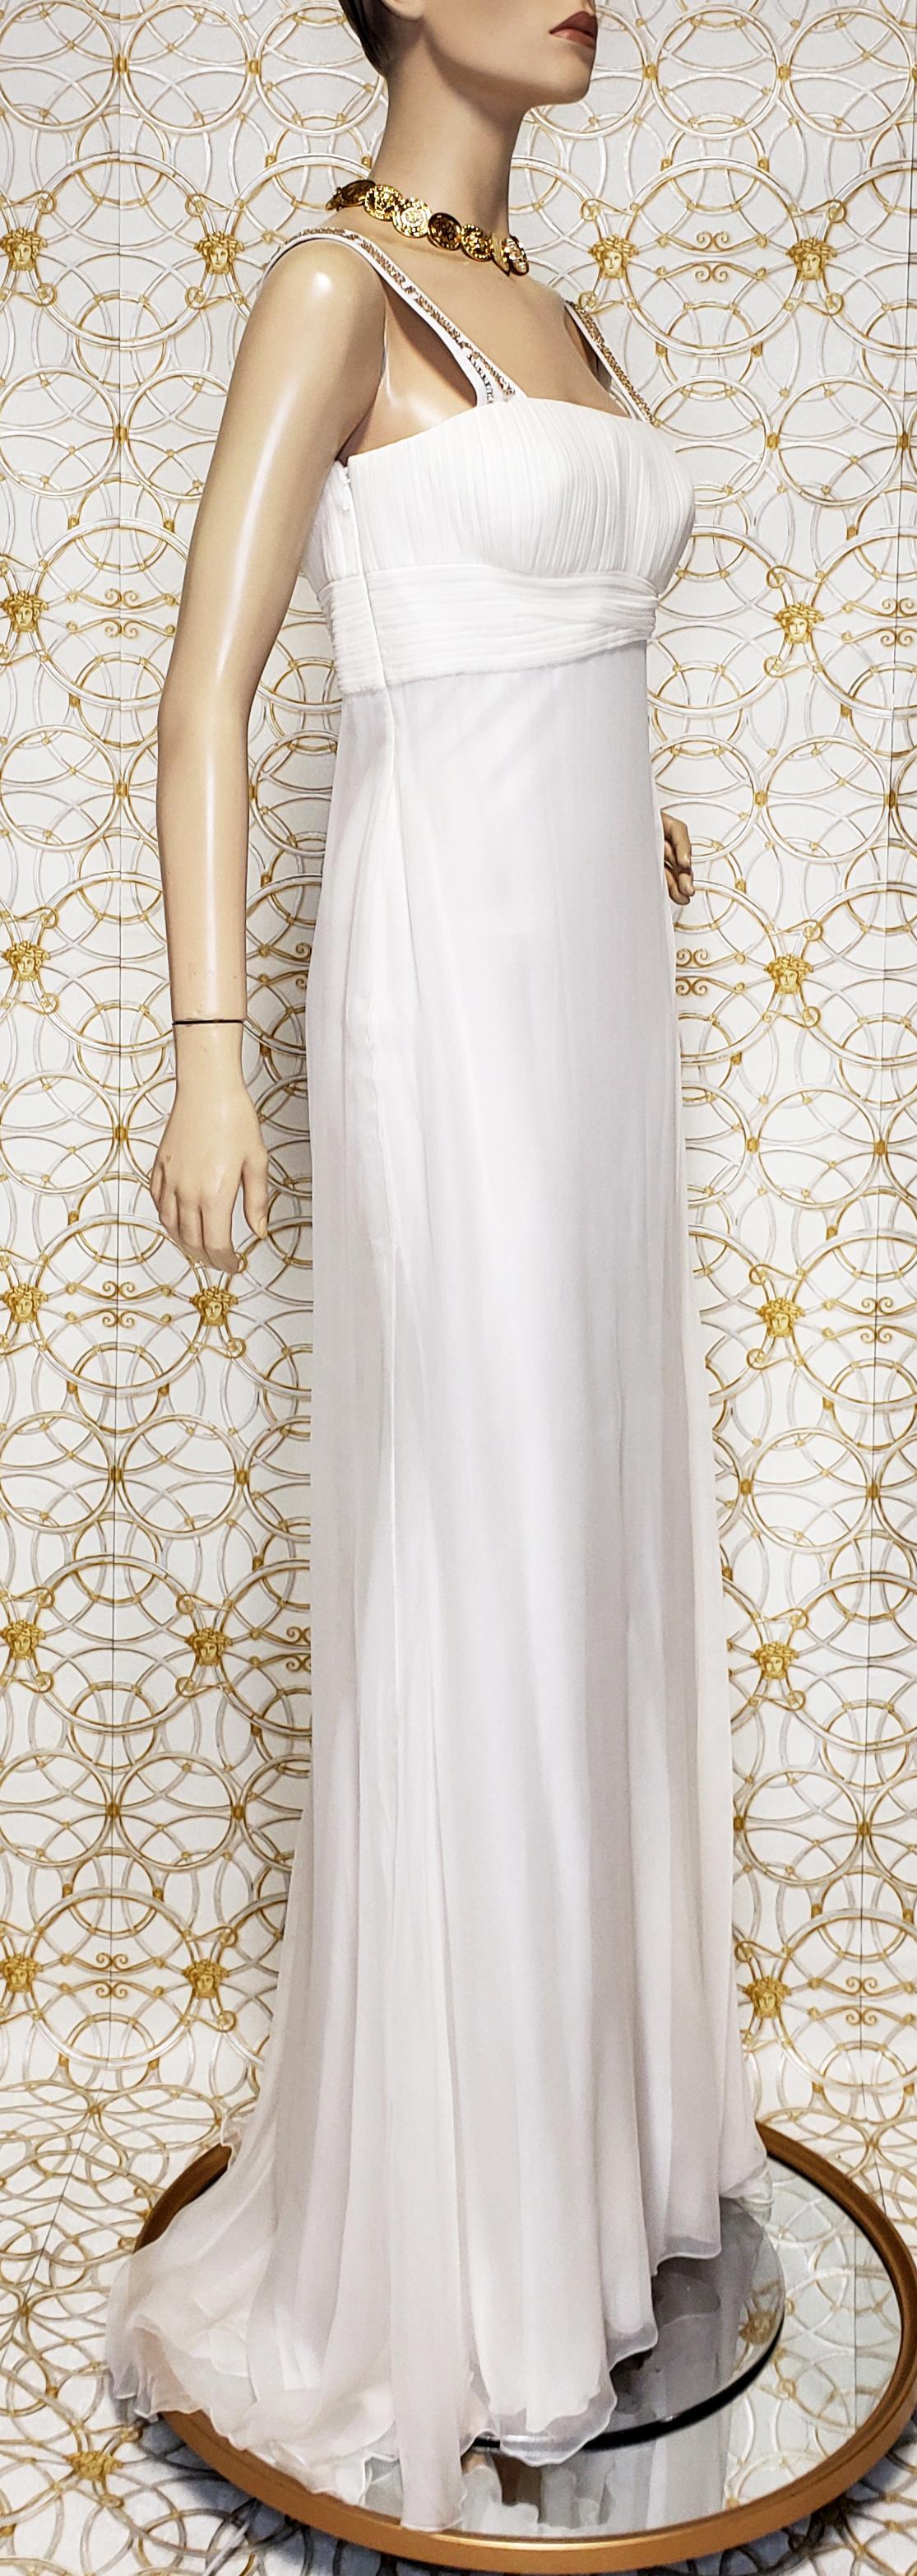 New Versace Crystal Embellished White Silk Gown 44 - 8 3